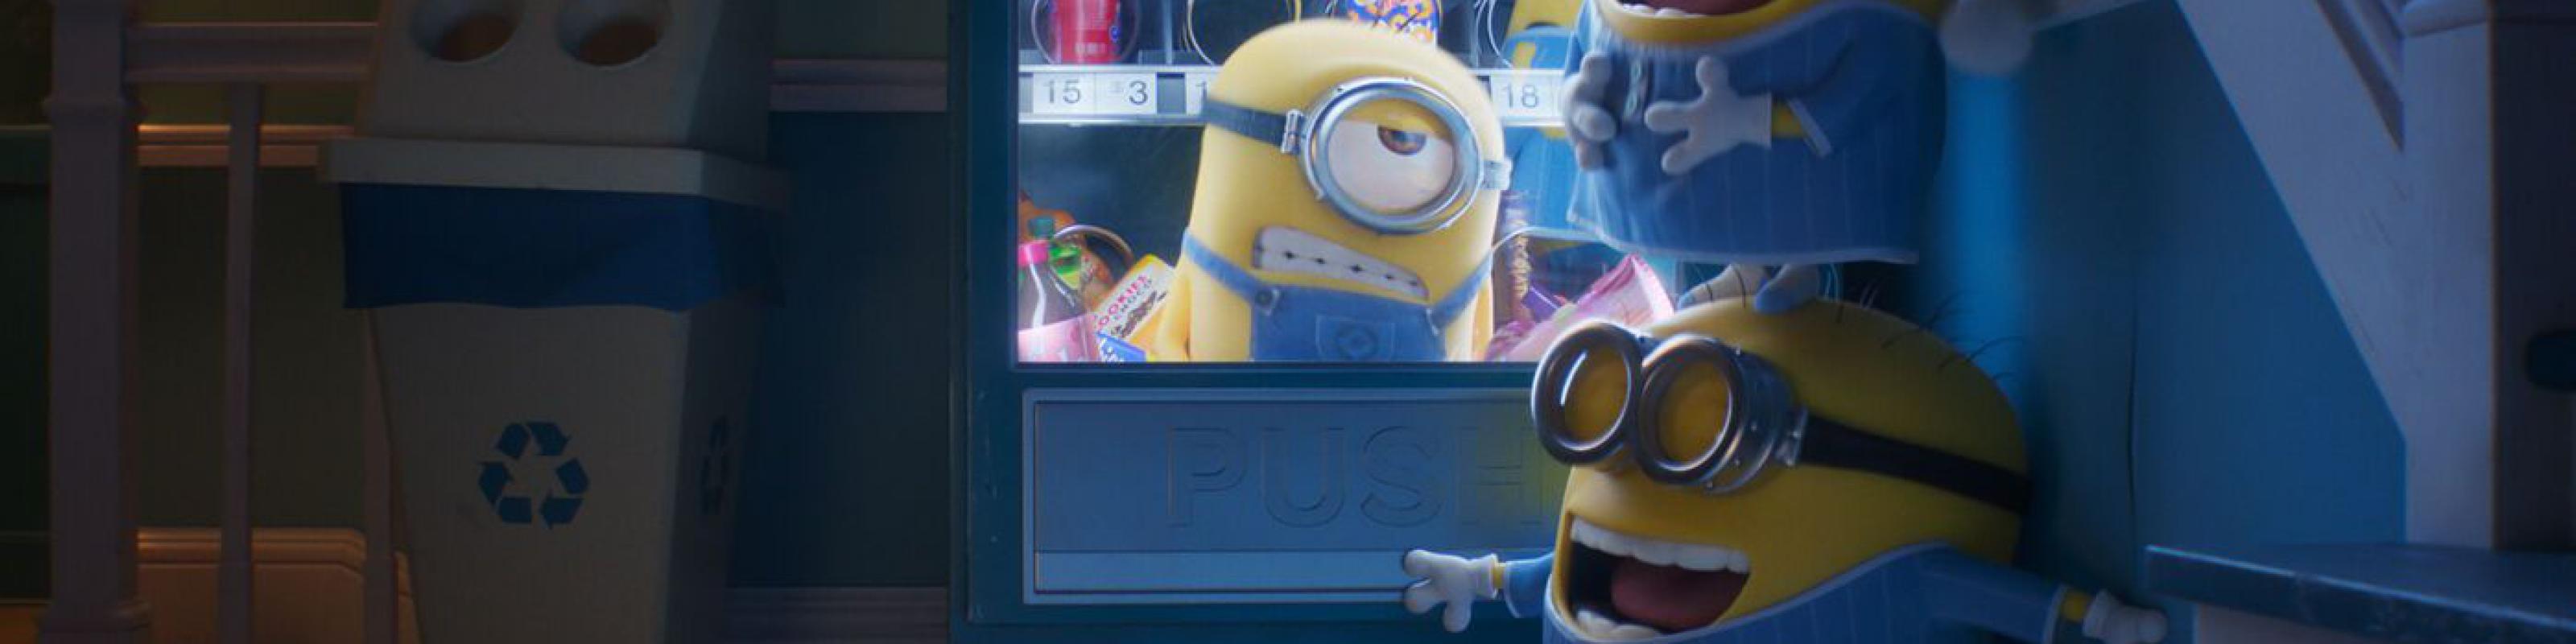 Illumination Entertainment and Universal Studios. All rights reserved.